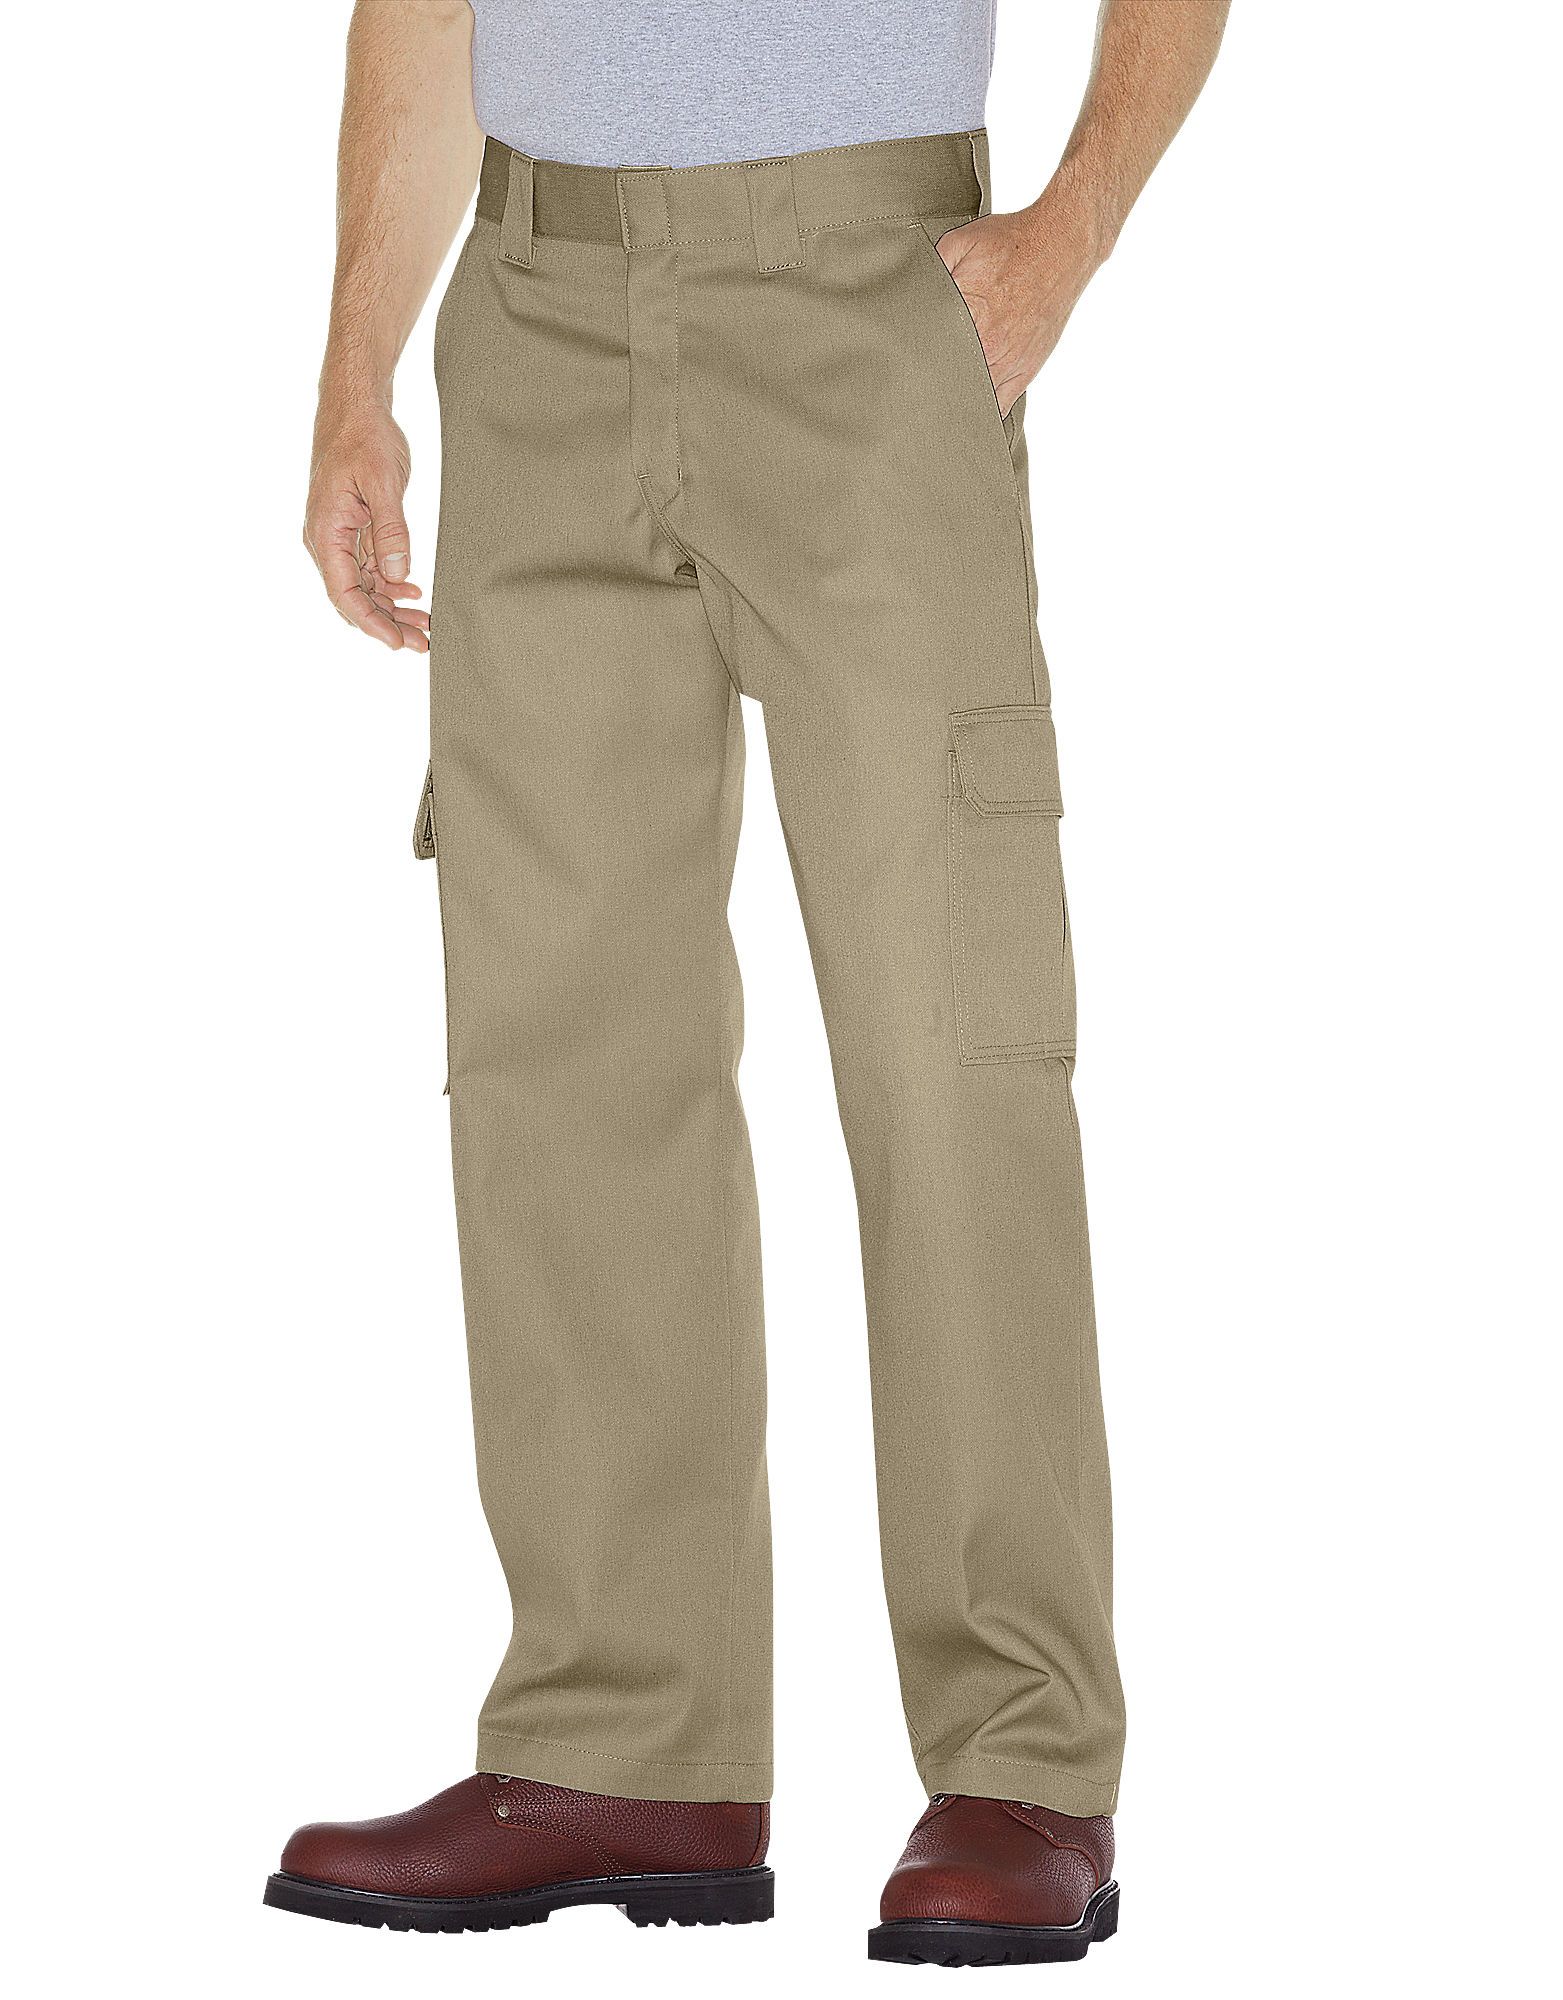 Carhartt Men's 35 in. x 30 in. Dark Khaki Cotton Washed Twill Dungaree Relaxed  Fit Pant B324-DKH - The Home Depot